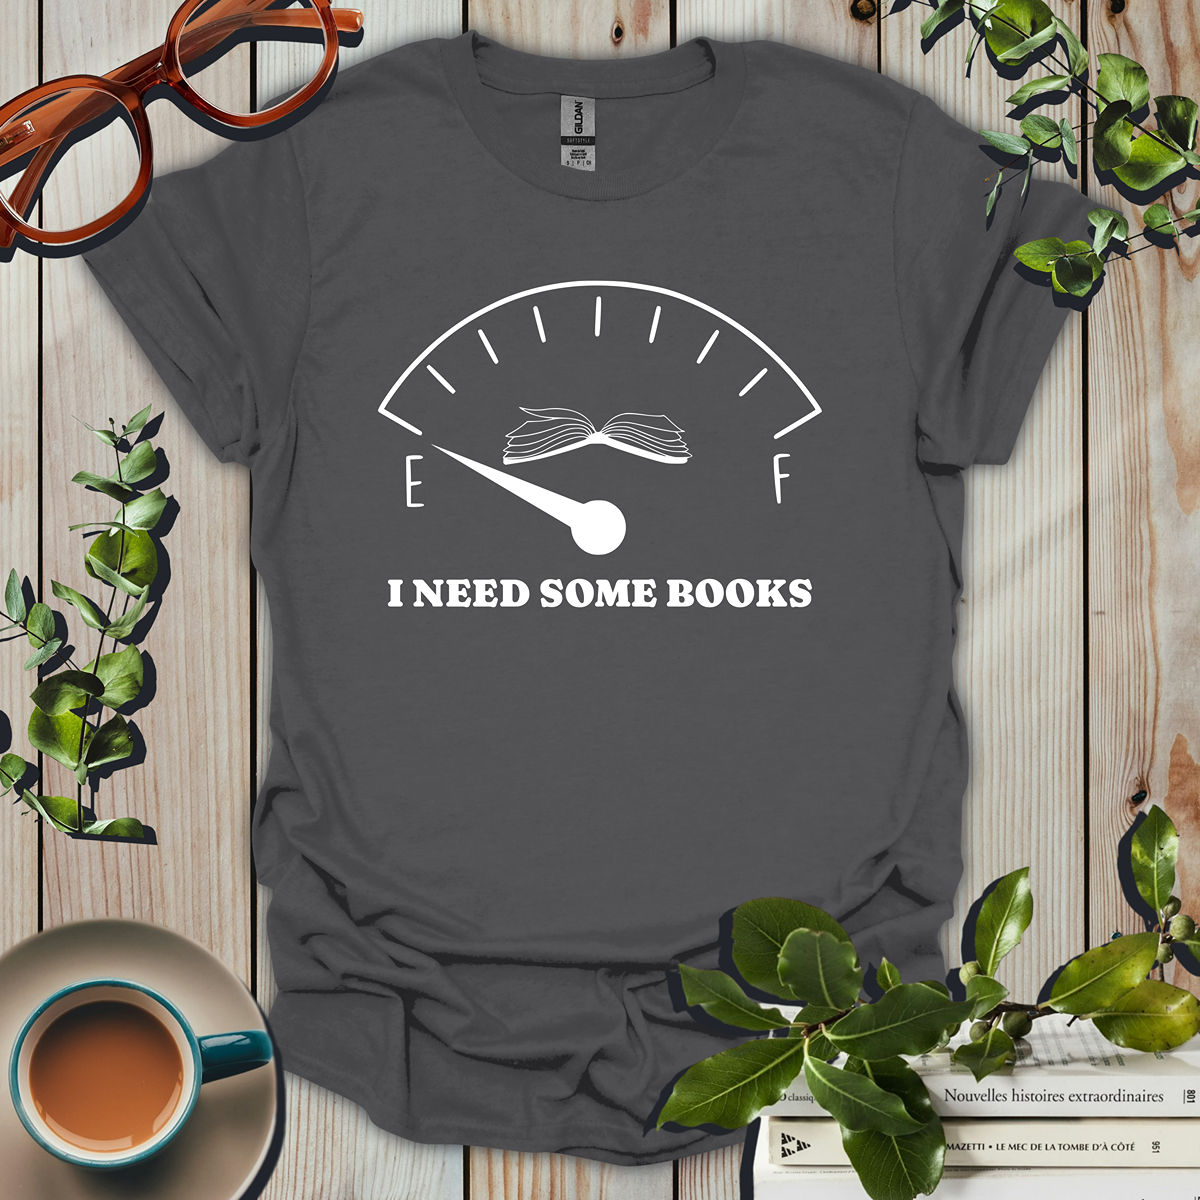 I Need Some Books Funny T-Shirt